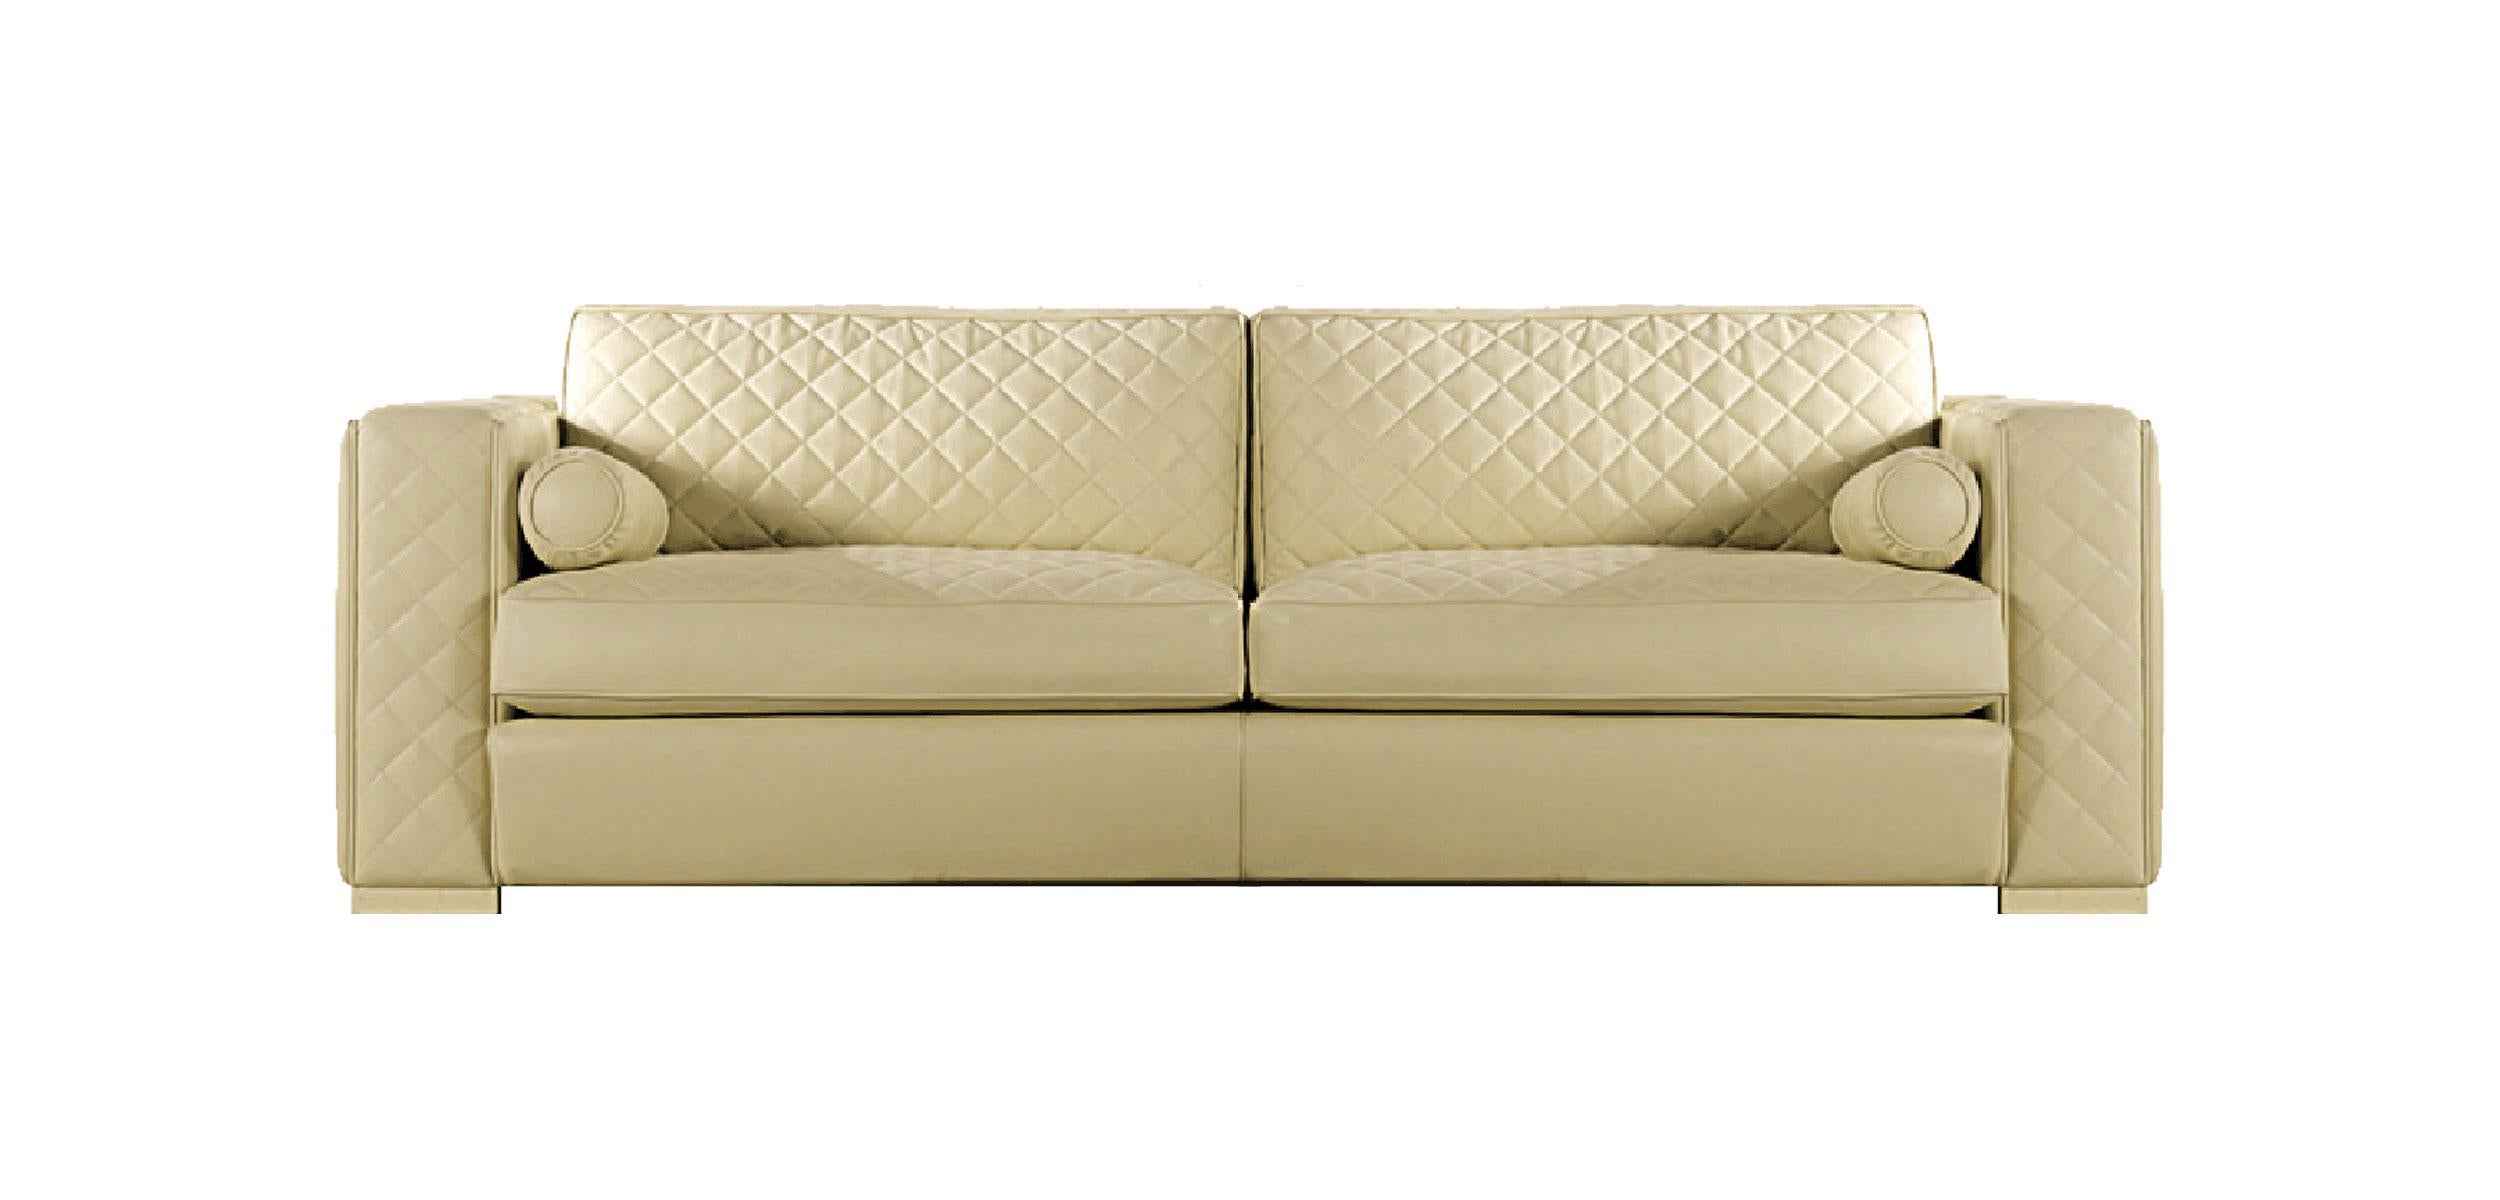 Mediterraneo Three-Seat Sofa in Leather with Embroidered Cushions by Zanaboni For Sale